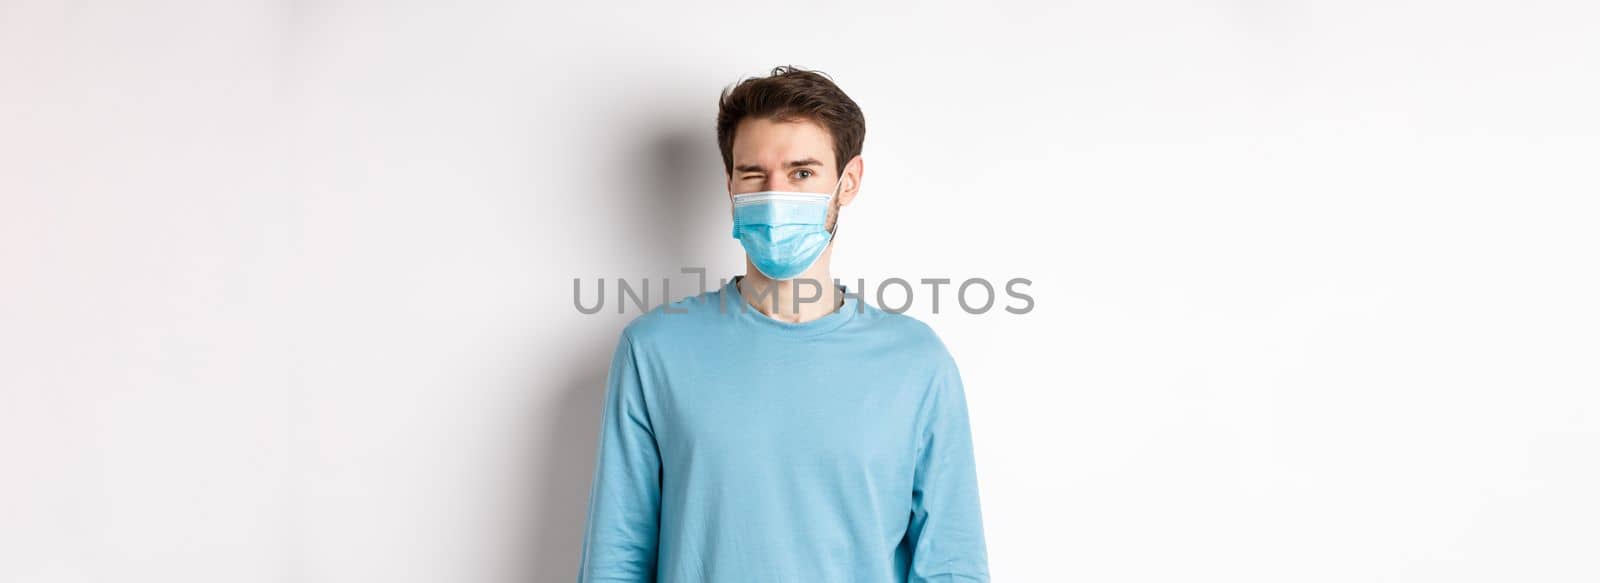 Covid-19, pandemic and social distancing concept. Cheerful caucasian man in face mask winking at camera, looking happy, standing over white background.